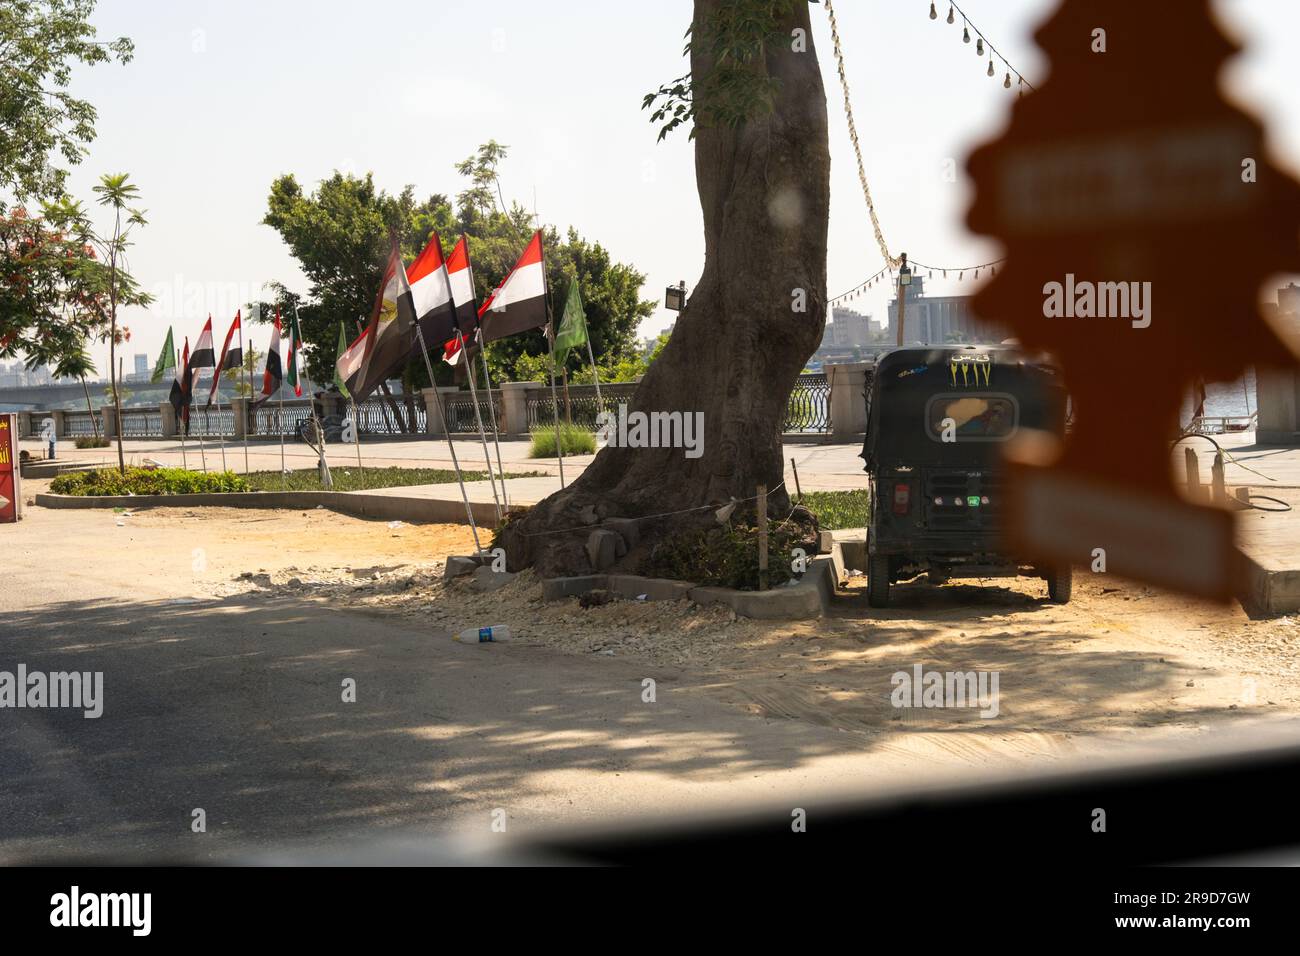 Cairo, Egypt - June 25 2023: Egyptian flags and Tuktuk seen from a vehicle parked next to the new 'Ahl Misr Walkway' by the Nile Stock Photo